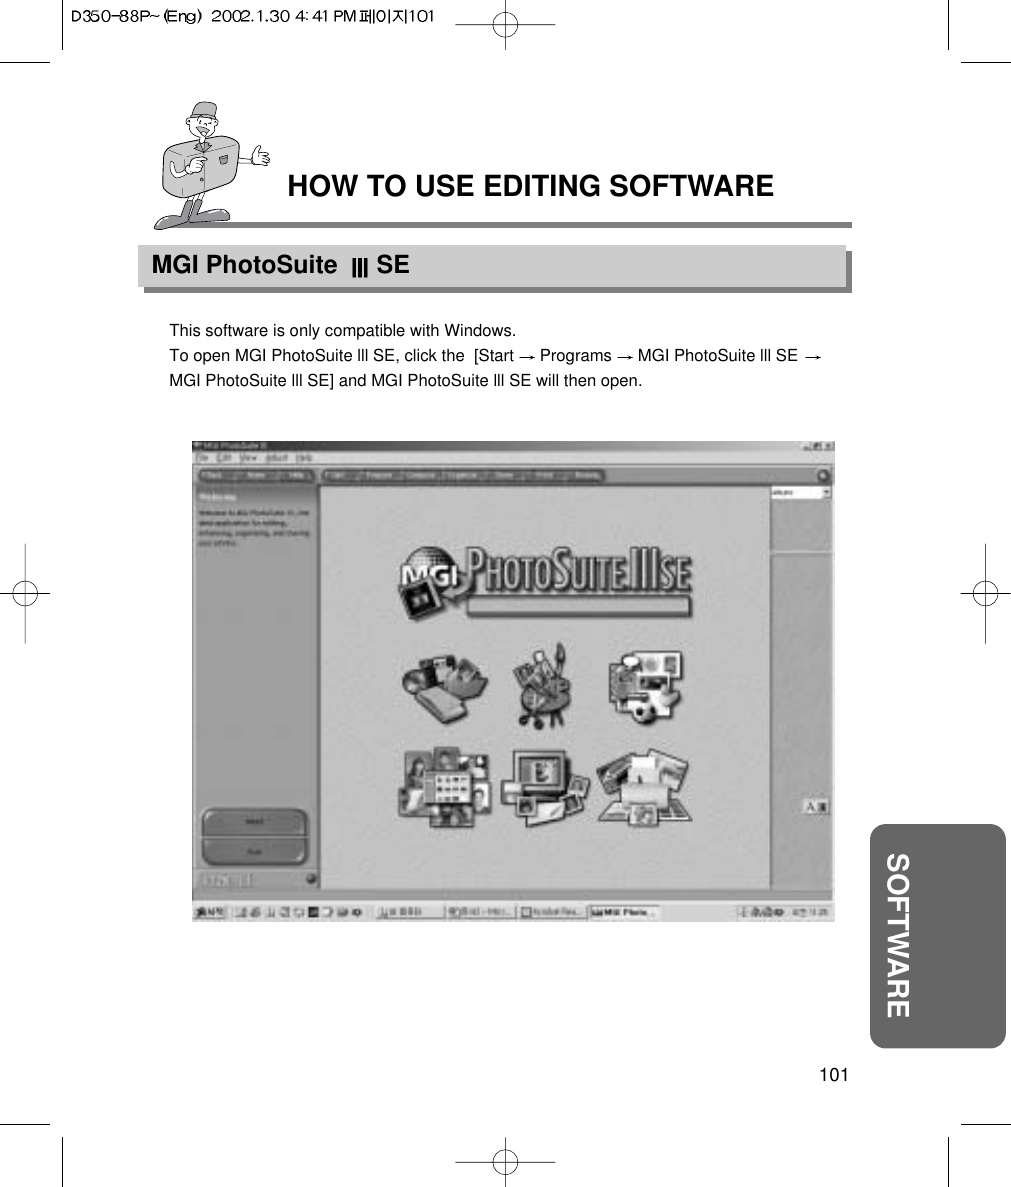 HOW TO USE EDITING SOFTWAREMGI PhotoSuite  SE101SOFTWAREThis software is only compatible with Windows.To open MGI PhotoSuite lll SE, click the  [Start  Programs  MGI PhotoSuite lll SE MGI PhotoSuite lll SE] and MGI PhotoSuite lll SE will then open.